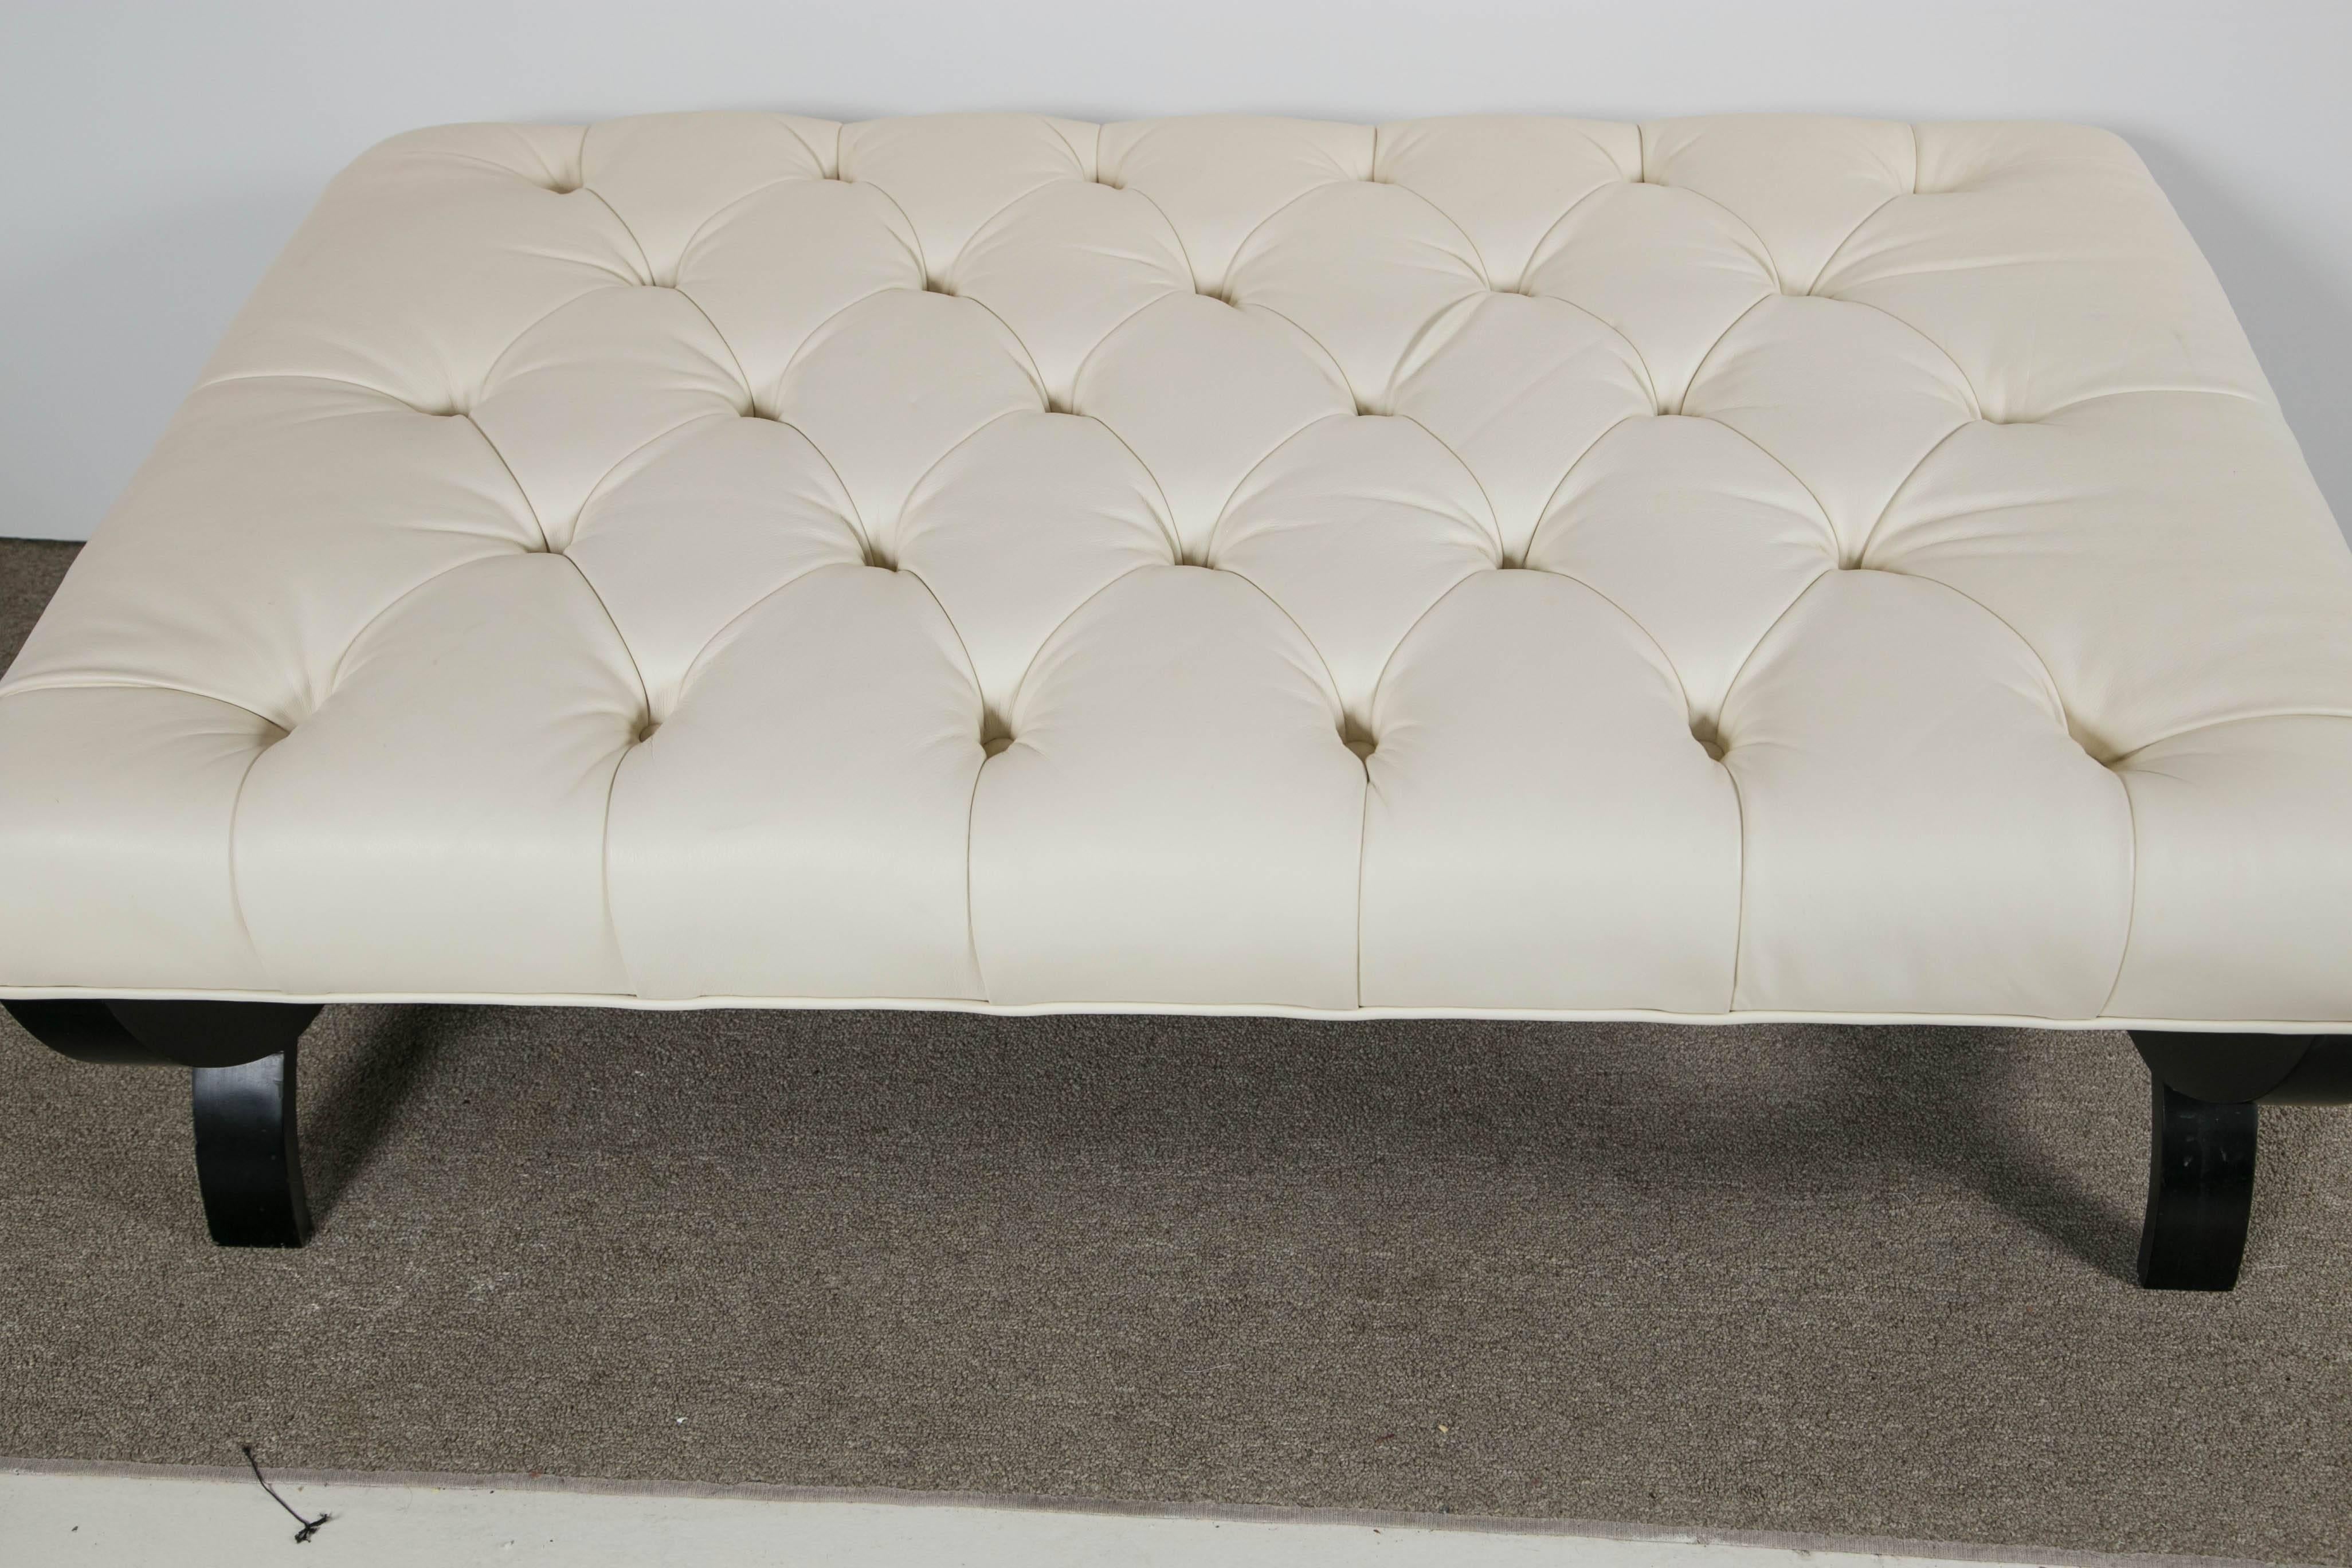 Directoire style tufted ottoman by Thomas Pheasant for baker. Newly upholstered in white leather with ebonized base.